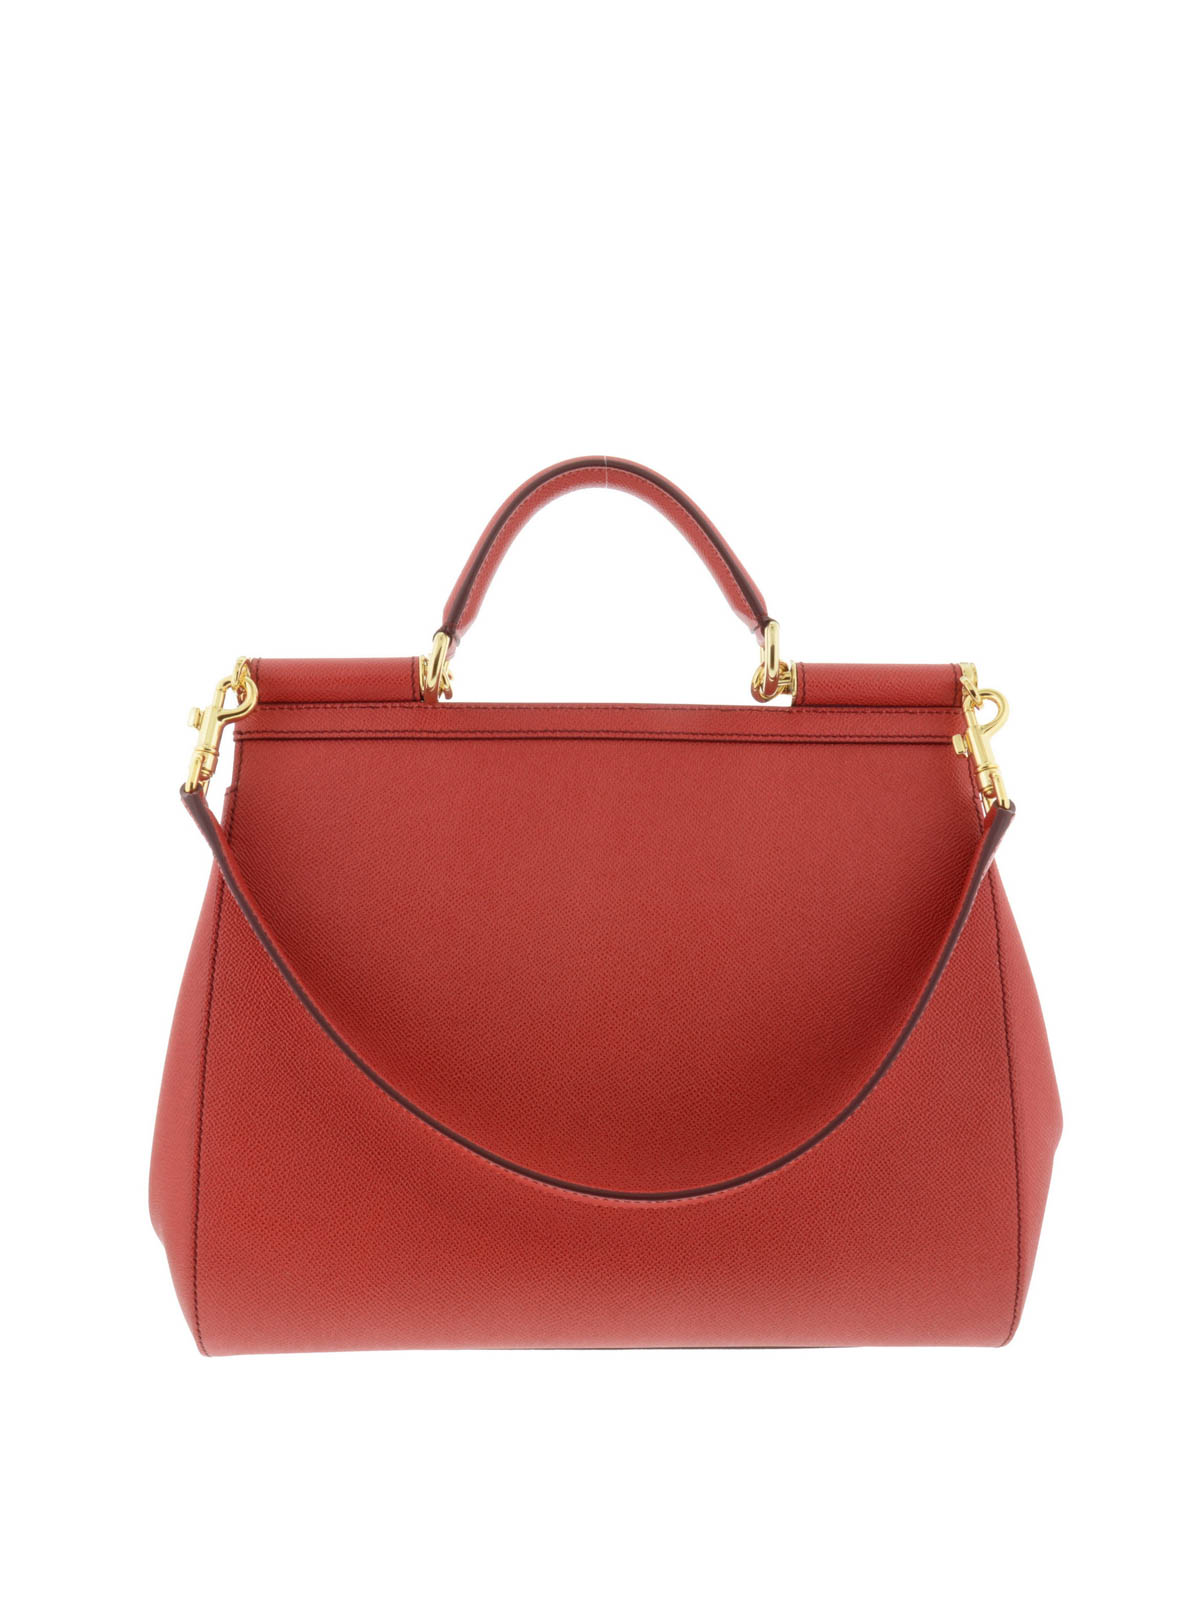 Dolce & Gabbana Small Sicily Tote Bag - Red